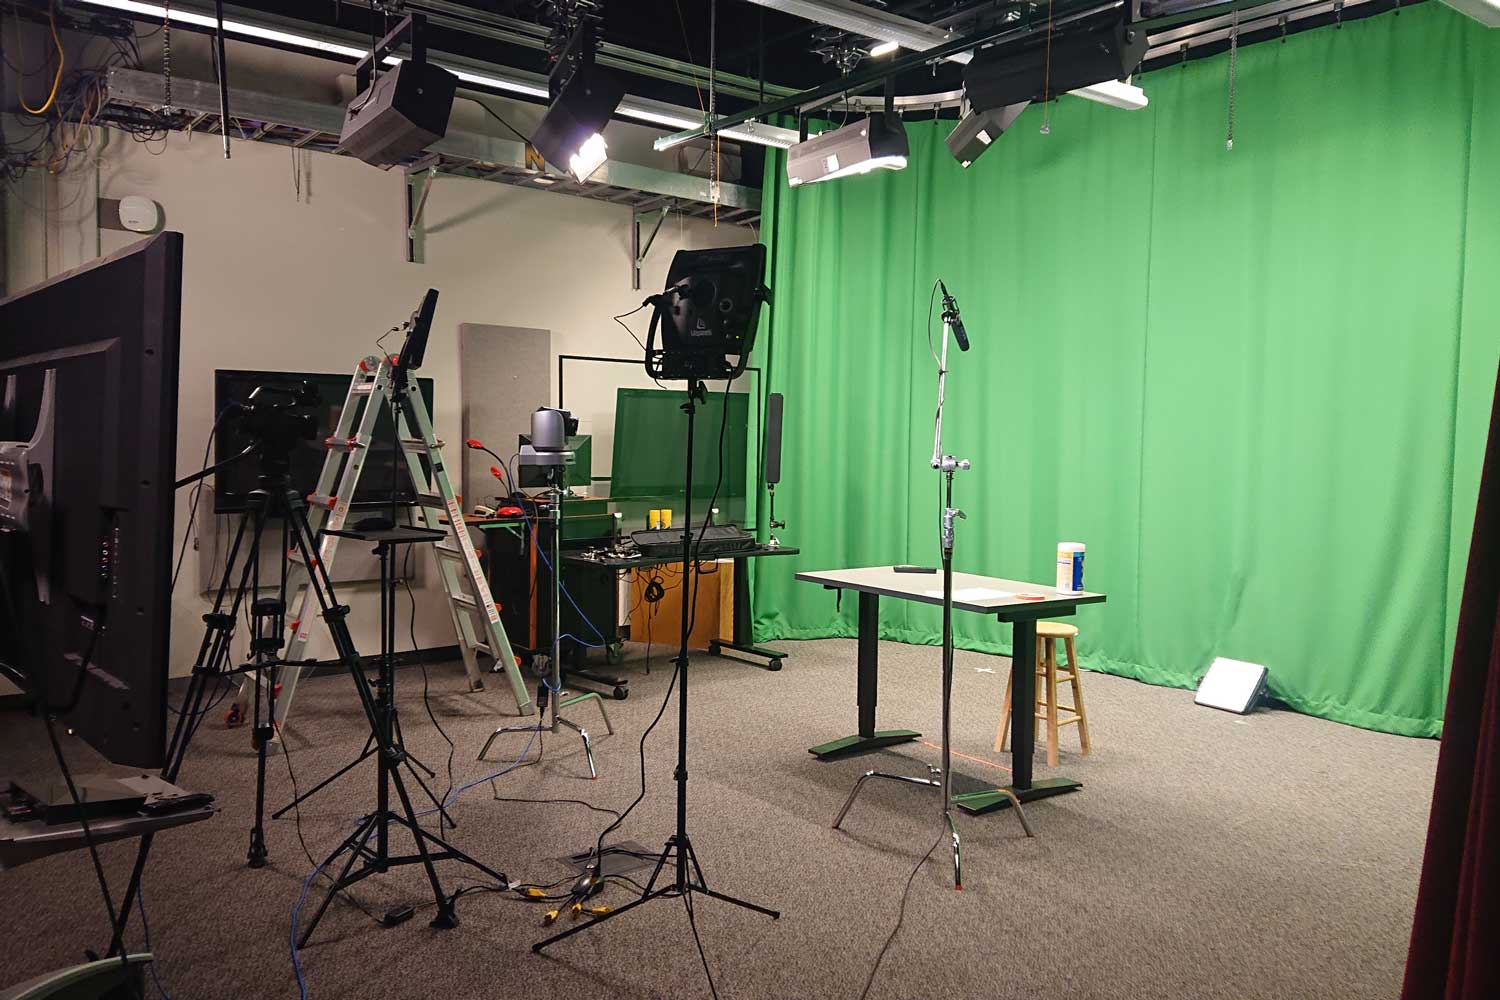 Photos of empty AMPS studio, with greenscreen, cameras, and furniture in view.